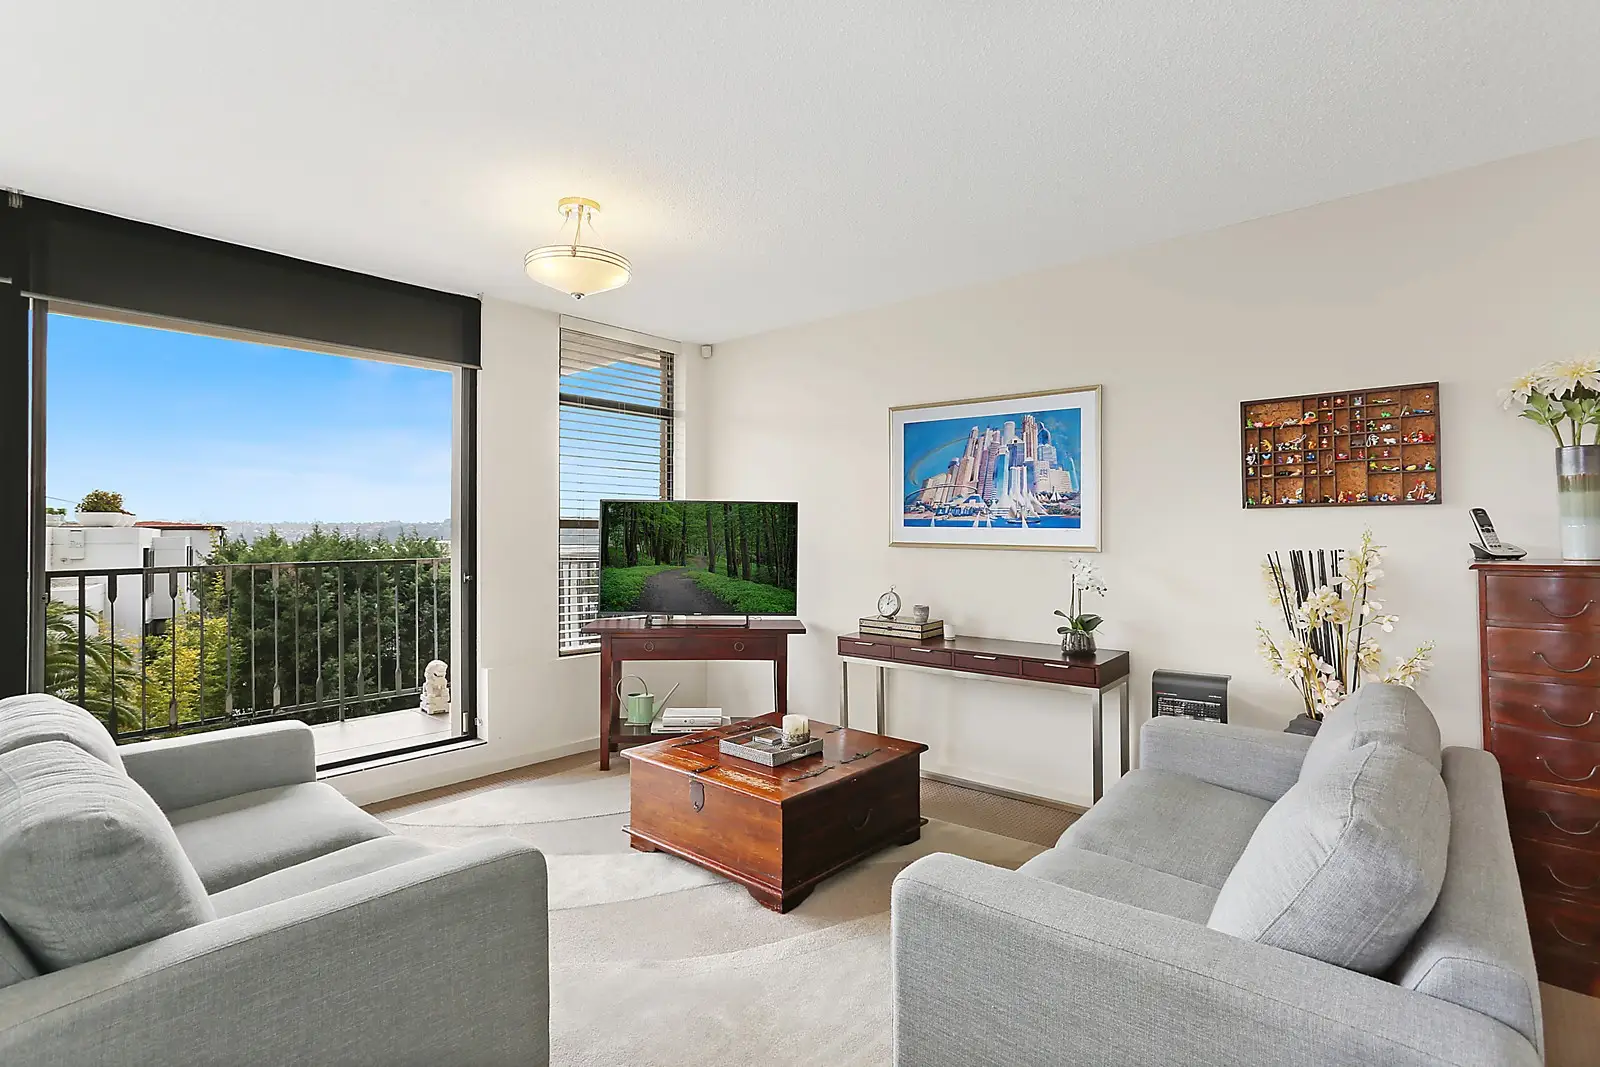 Photo #2: 1B/13 Thornton Street, Darling Point - Sold by Sydney Sotheby's International Realty